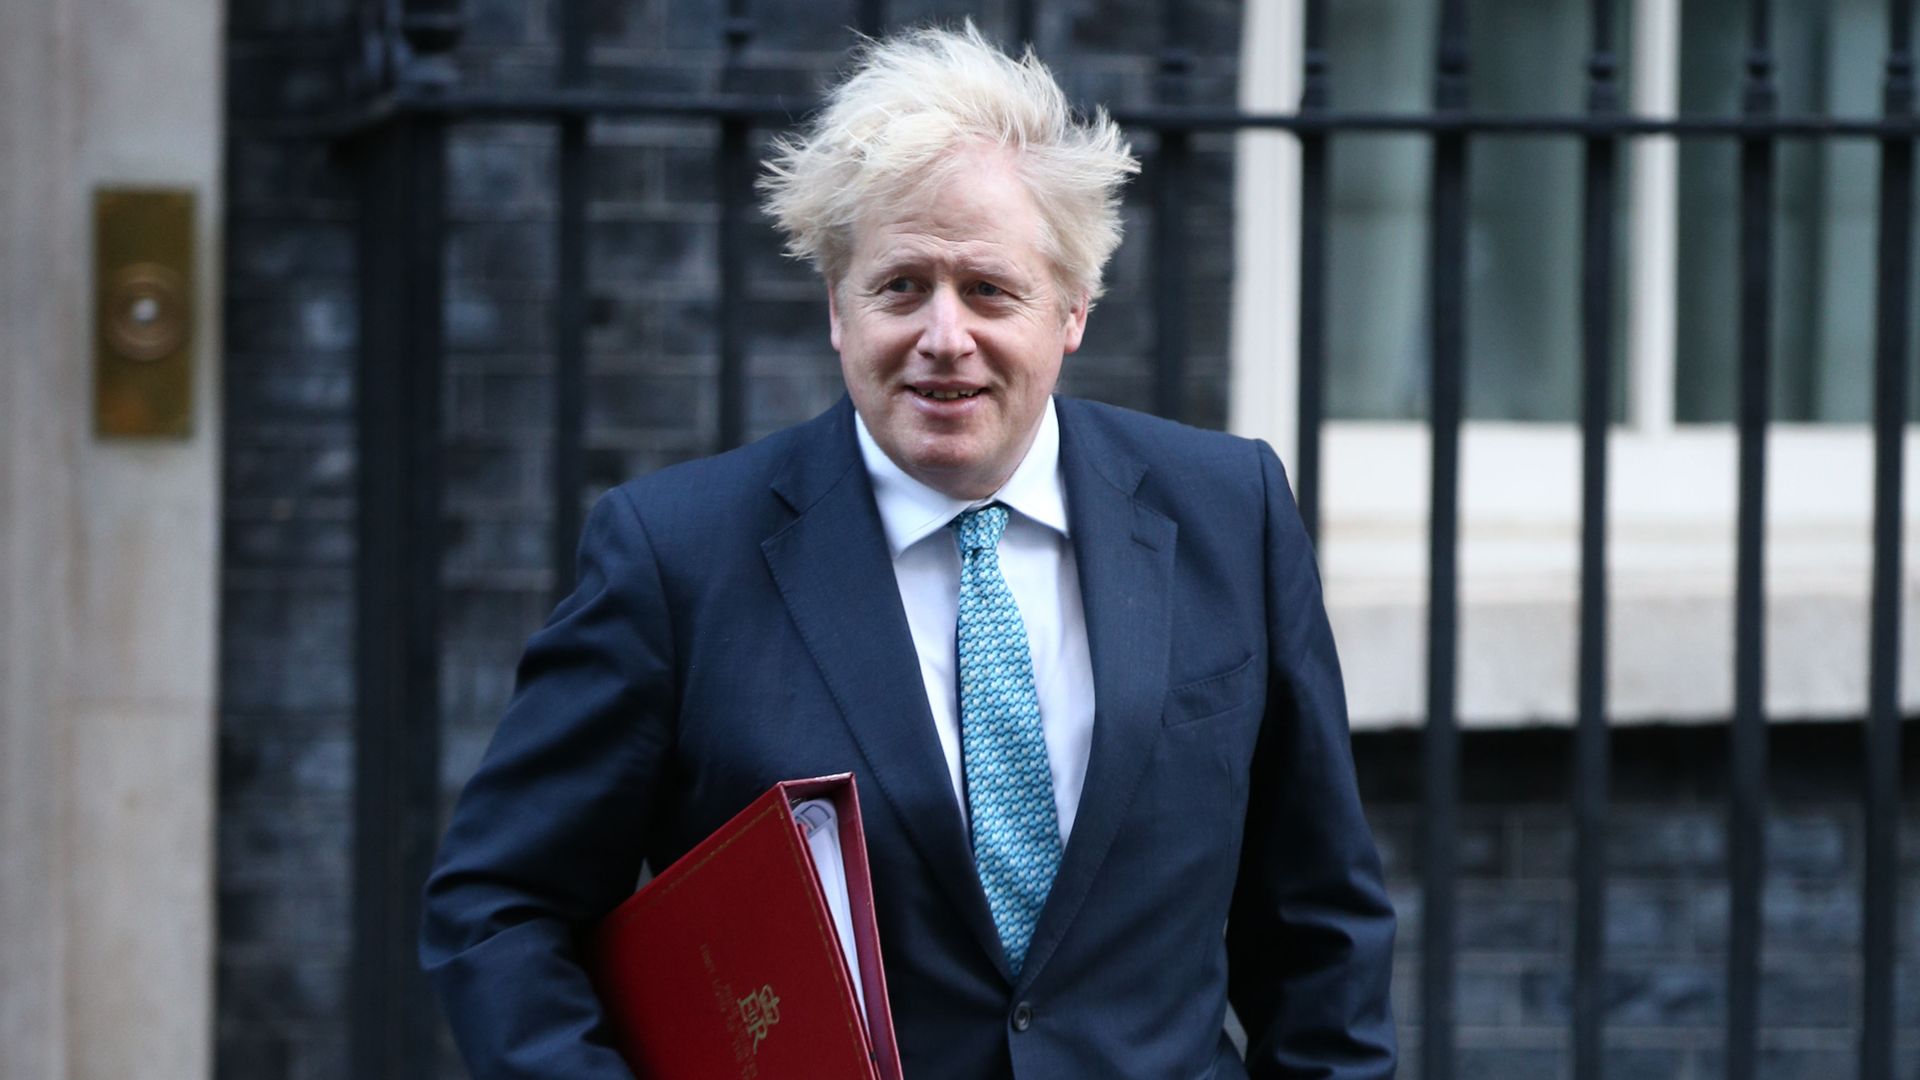 Prime minister Boris Johnson arrives in Downing Street, London, ahead of the government's weekly Cabinet meeting at the Foreign and Commonwealth Office (FCO). - Credit: PA